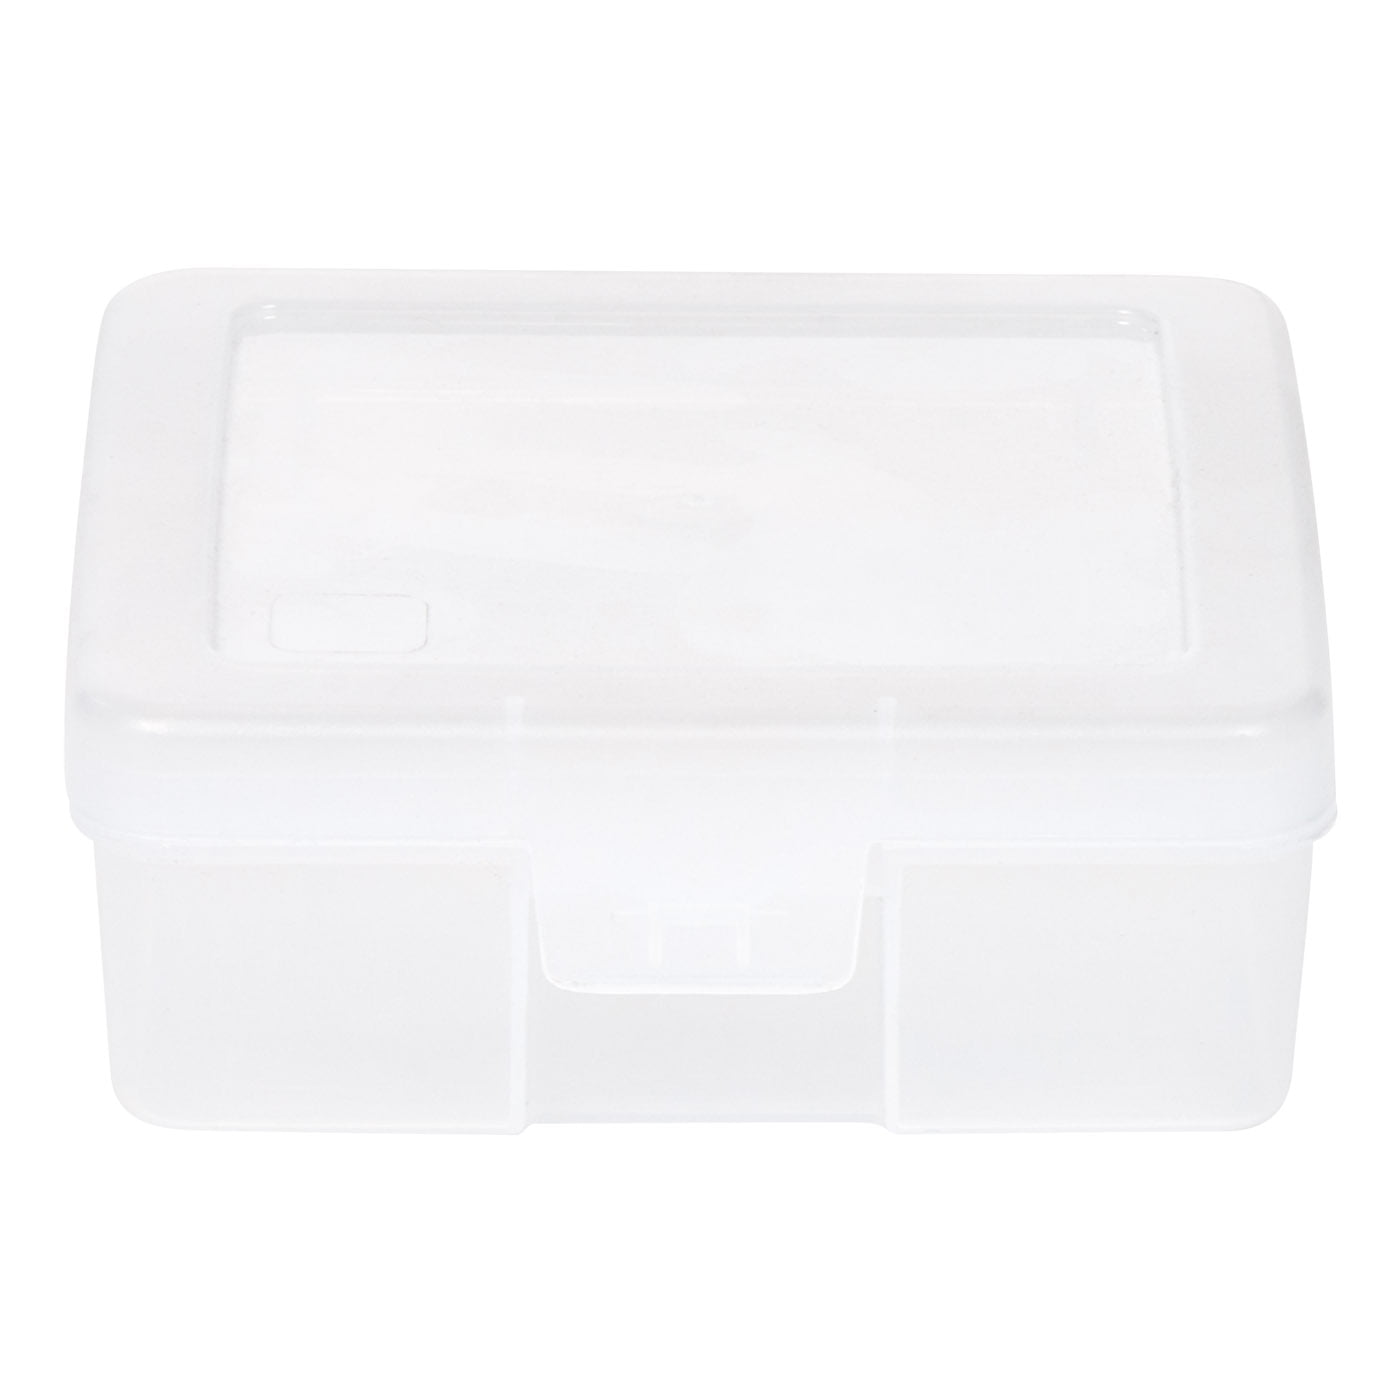 Clear/Spine: 14 mm / 8 Tabs CheckOutStore Plastic Storage Cases for Rubber Stamps 6